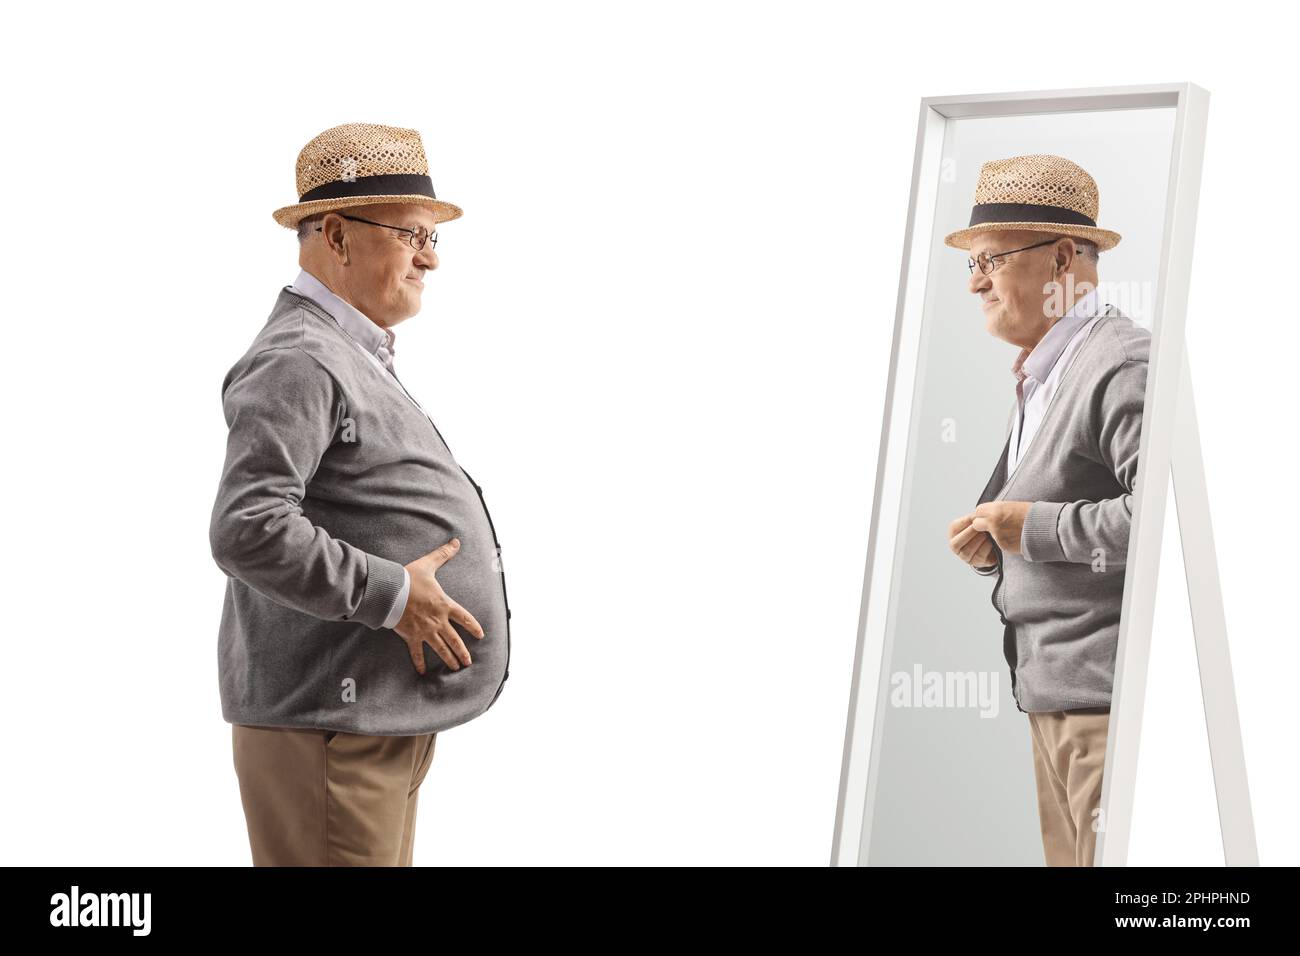 Elderly man with a big belly standing in front of a mirror isolated on white background Stock Photo